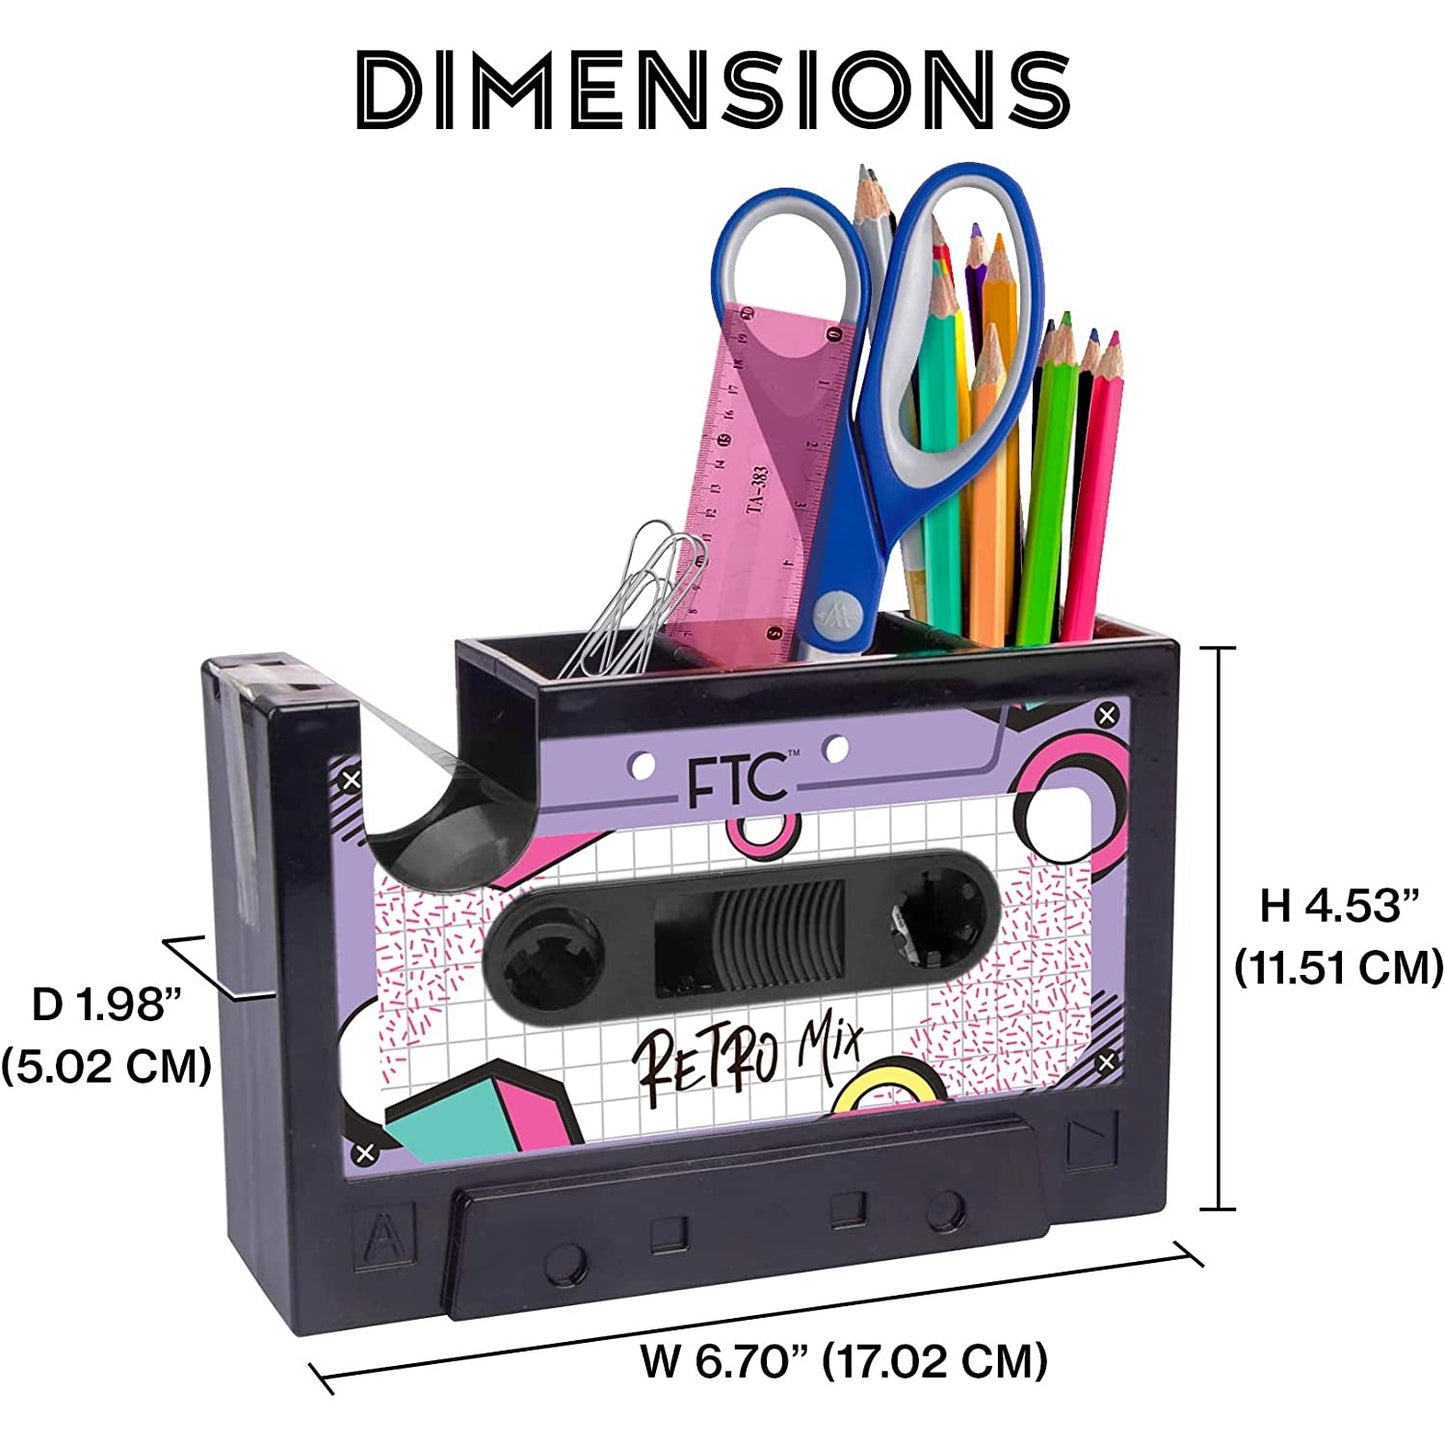 Size dimensions for a retro cassette tape dispenser and stationary holder. 17.02 cm width x 11.51 cm height x 5.02 cm depth.